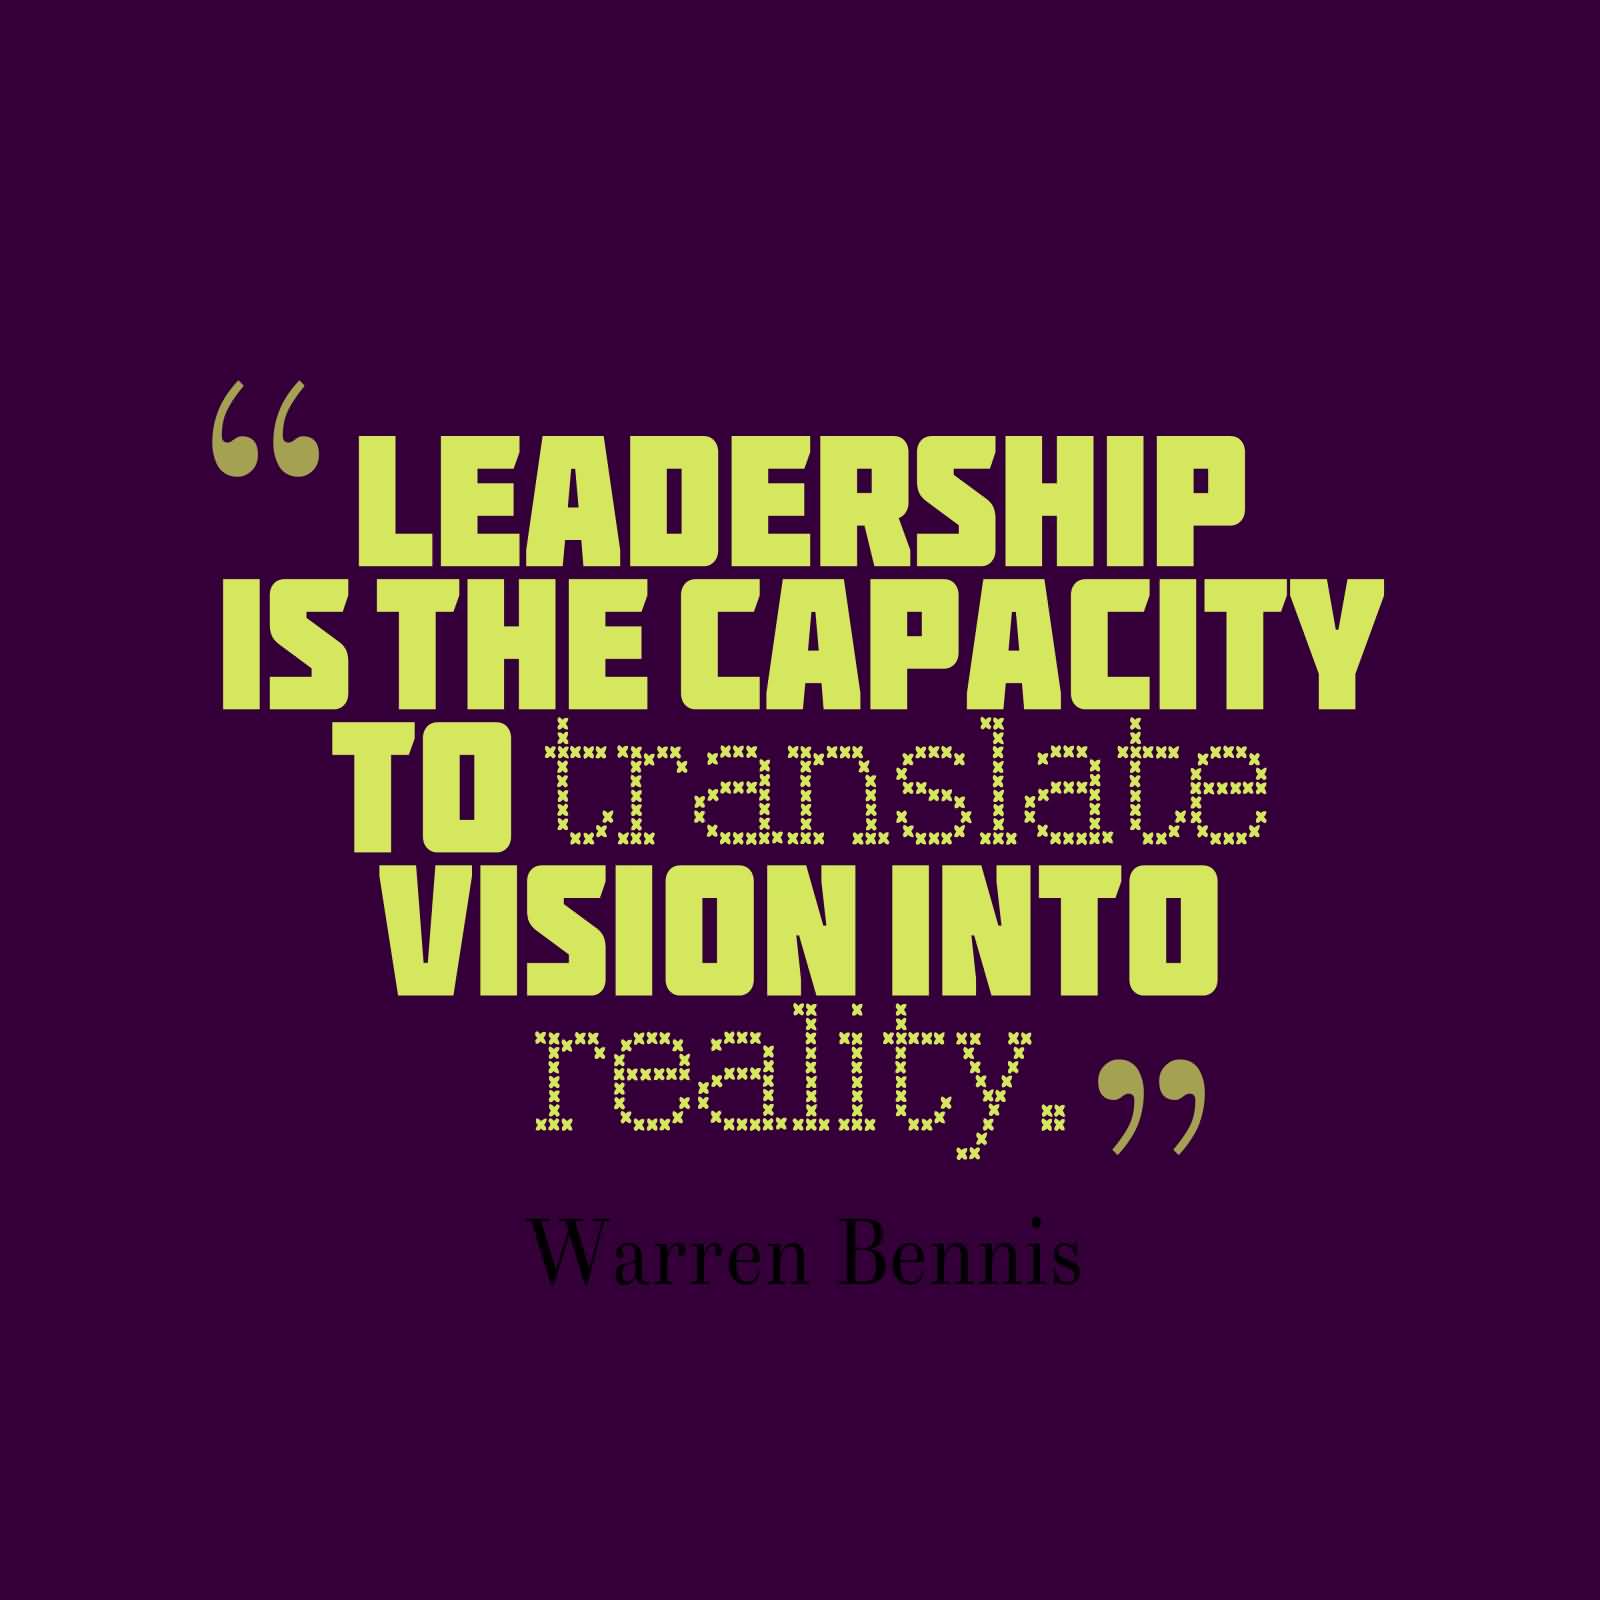 Leadership is the capacity to translate vision into reality - Warren Bennis